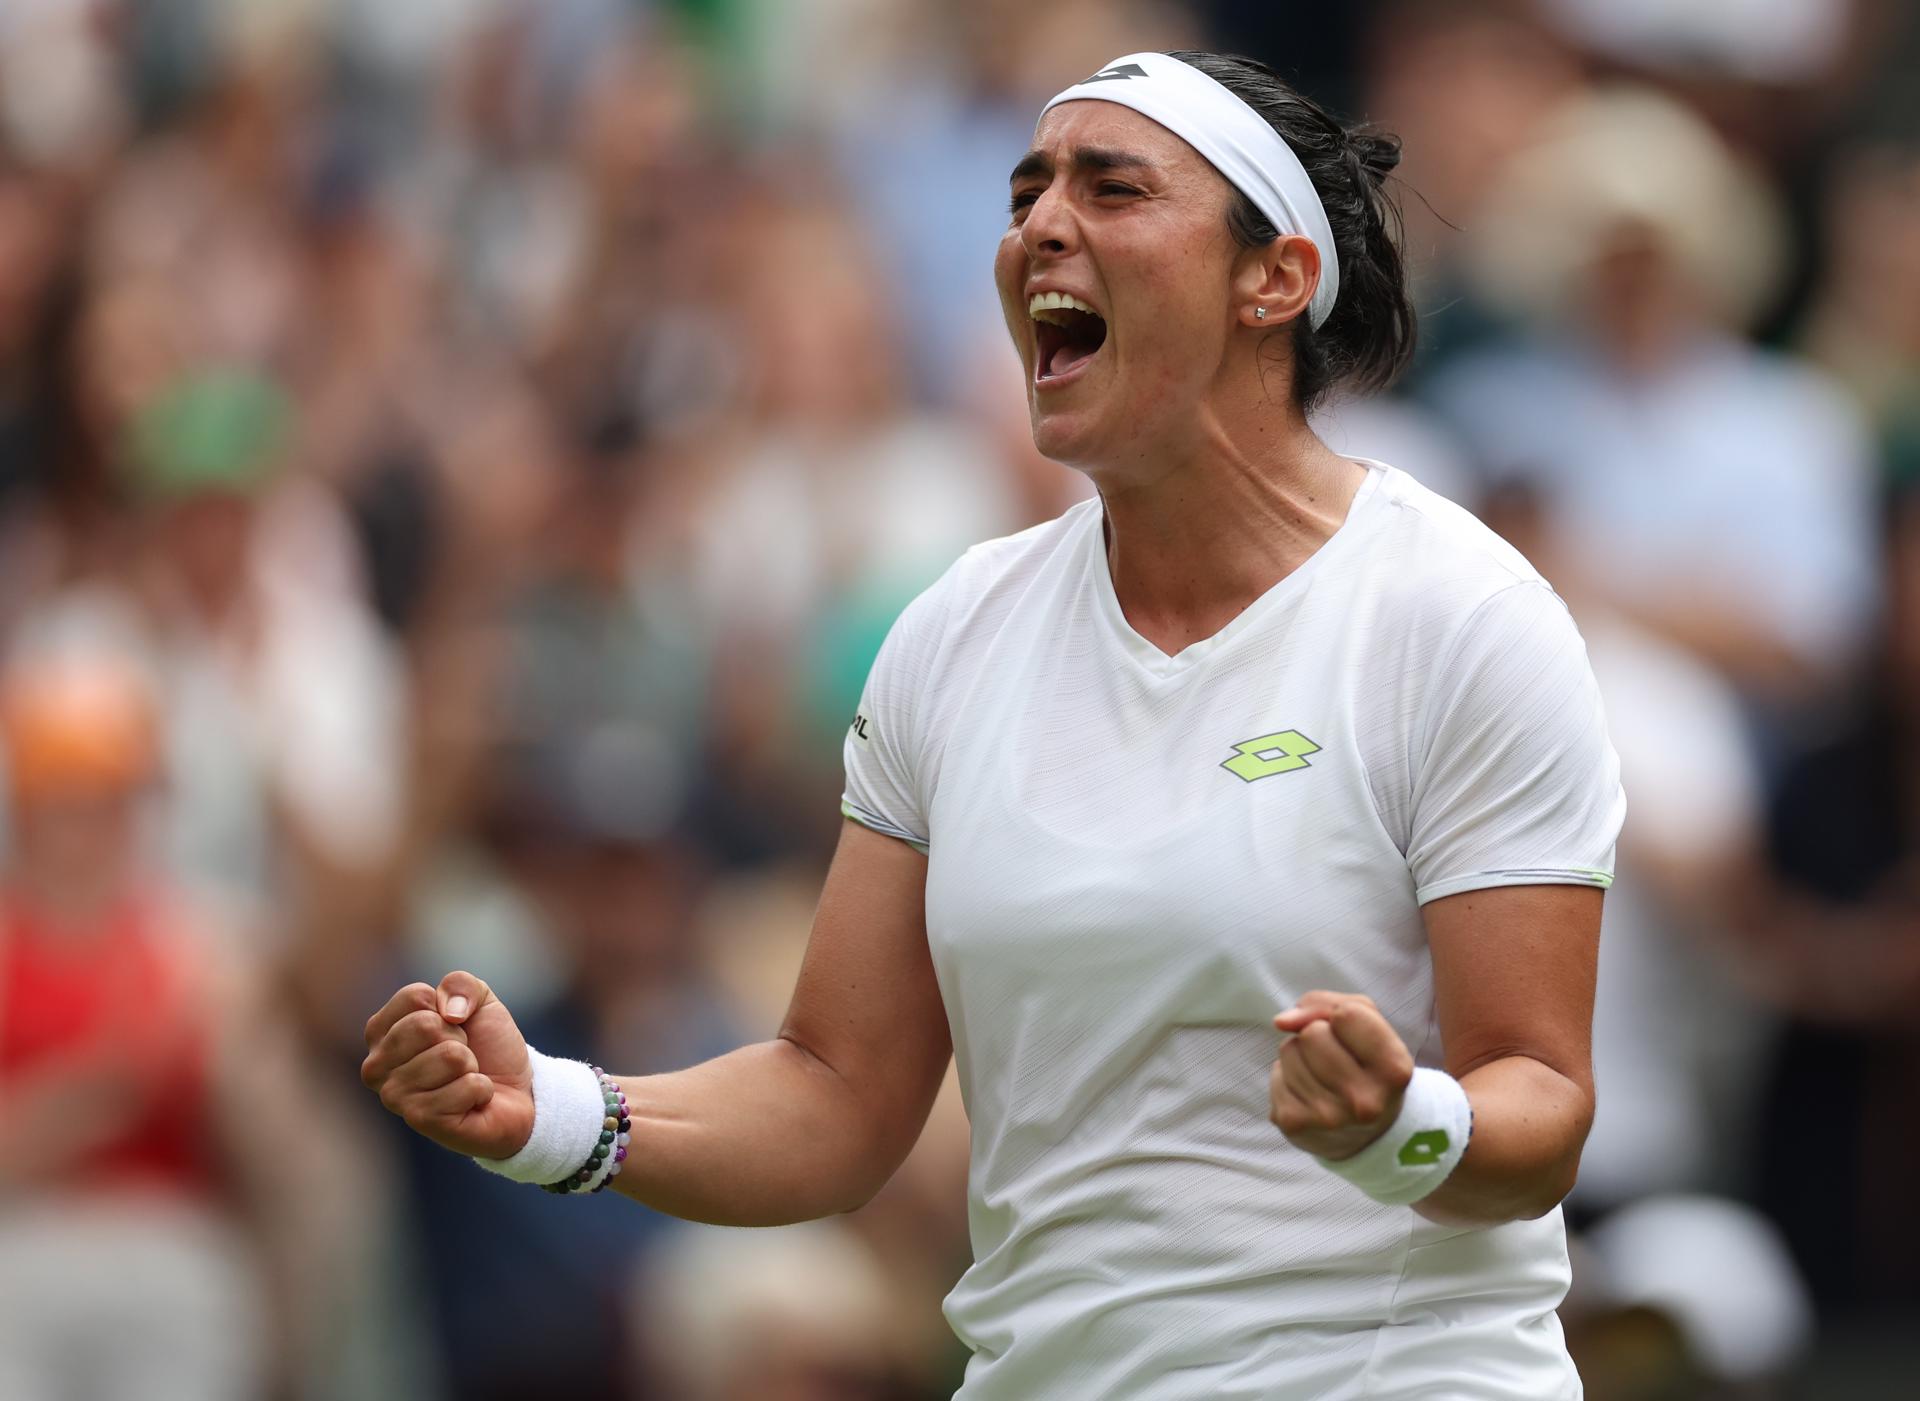 Sixth-seeded Tunisian Ons Jabeur celebrates after defeating Kazakhstan's Elena Rybakina 6-7 (5-7), 6-4, 6-1 in women's singles quarterfinal action at Wimbledon on 12 July 2023 in London, United Kingdom. EFE/EPA/ISABEL INFANTES
